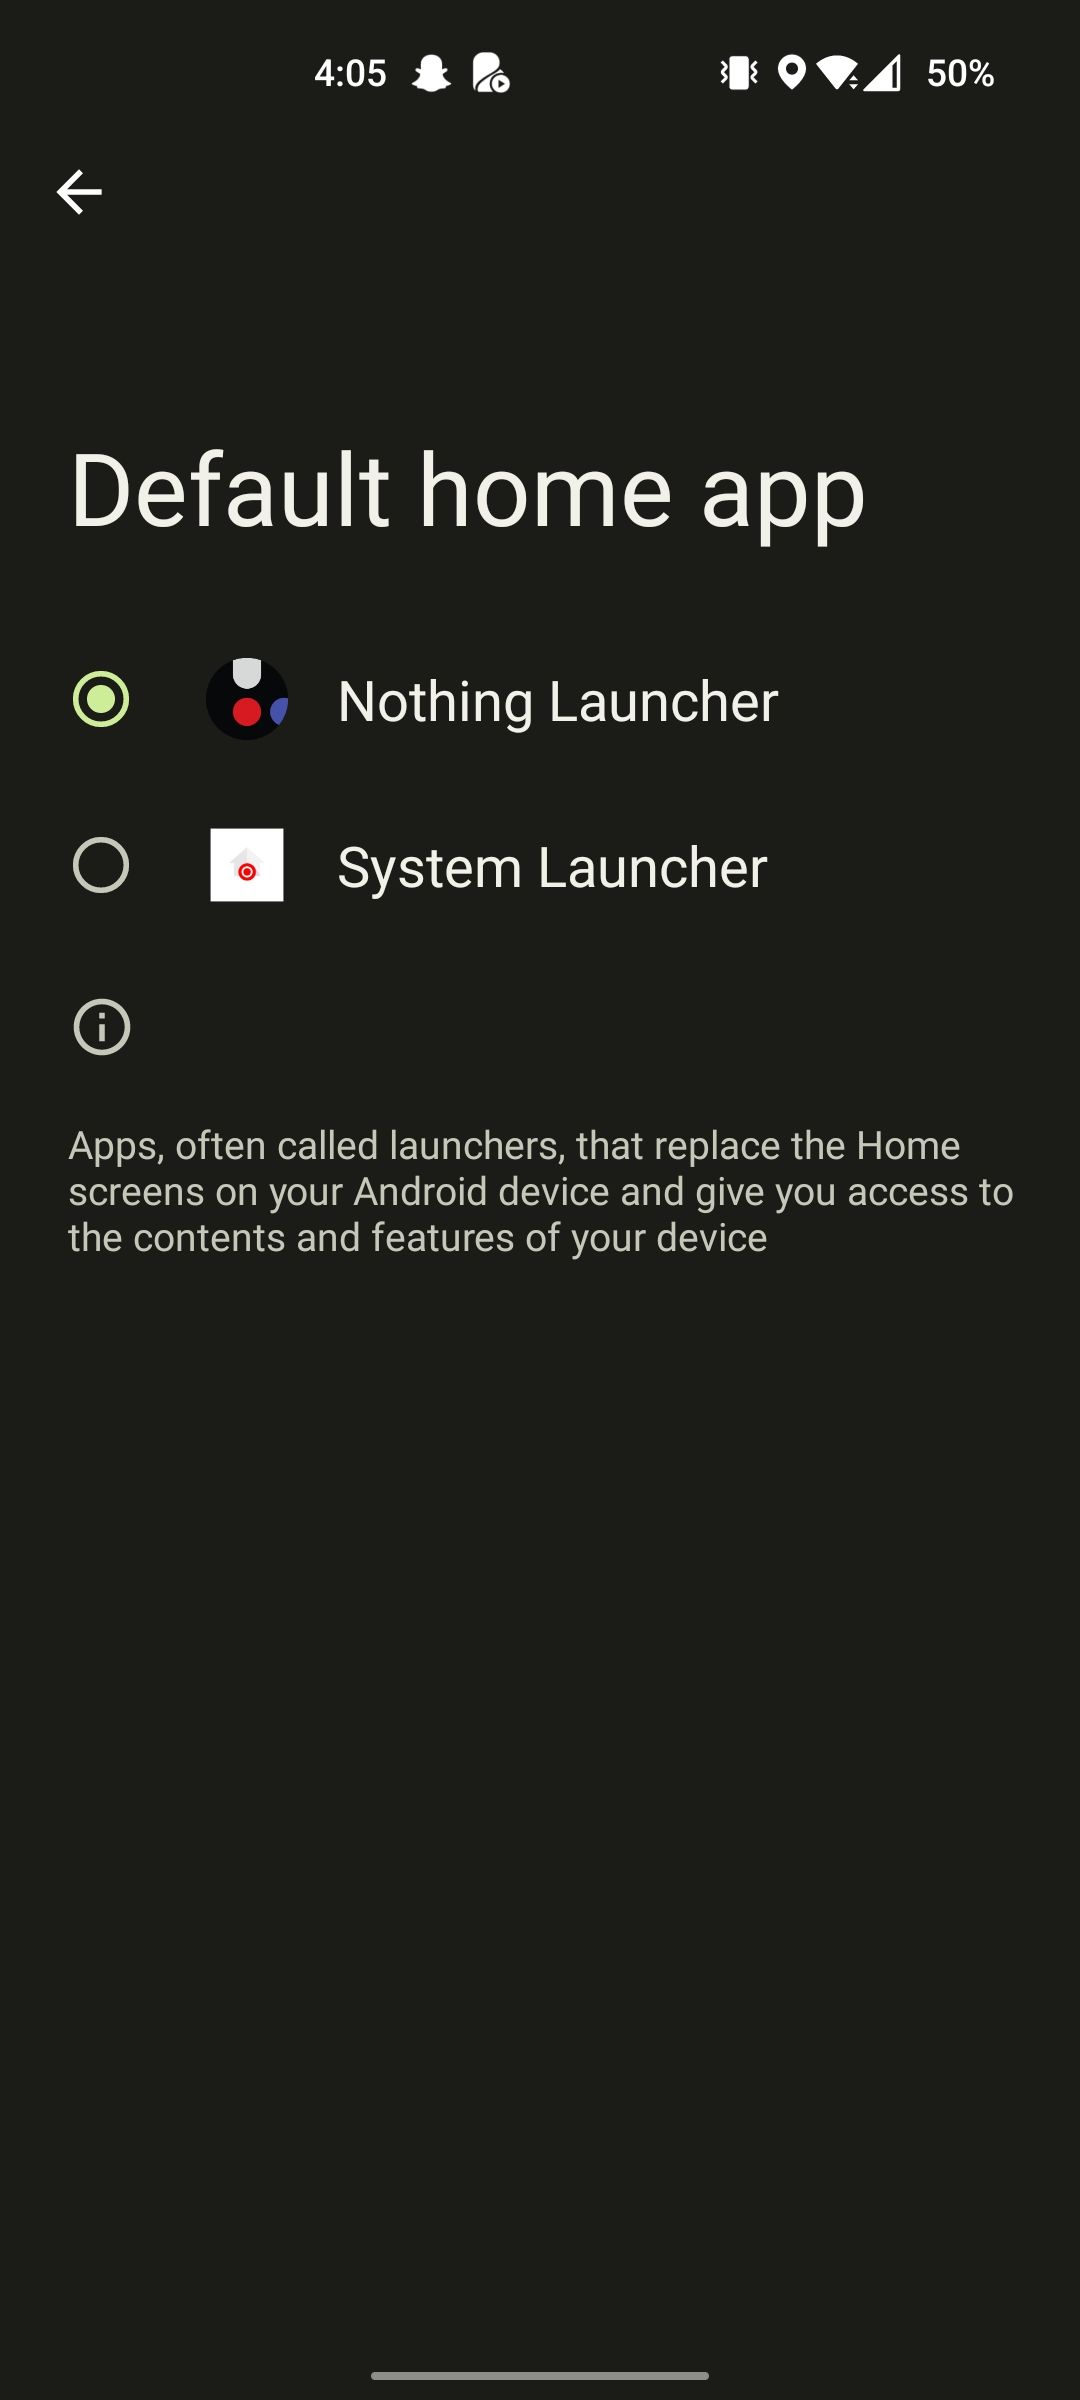 Selecting Nothing Launcher as the default home app